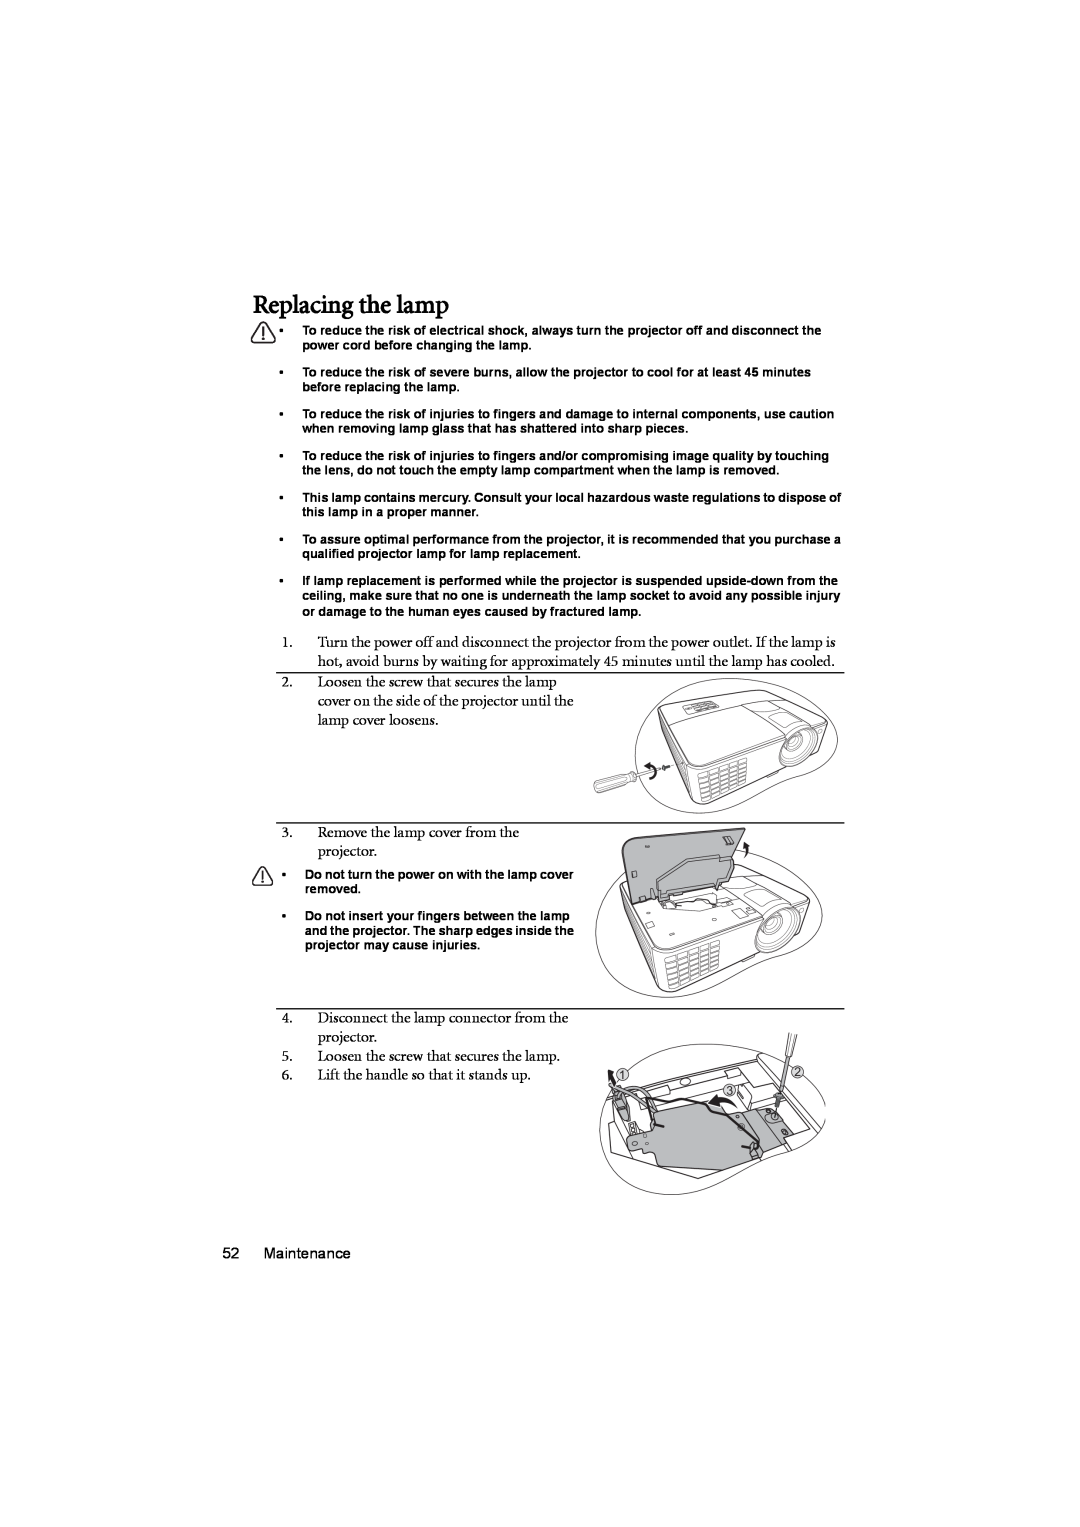 BenQ MX701 user manual Replacing the lamp, Loosen the screw that secures the lamp, Remove the lamp cover from the projector 